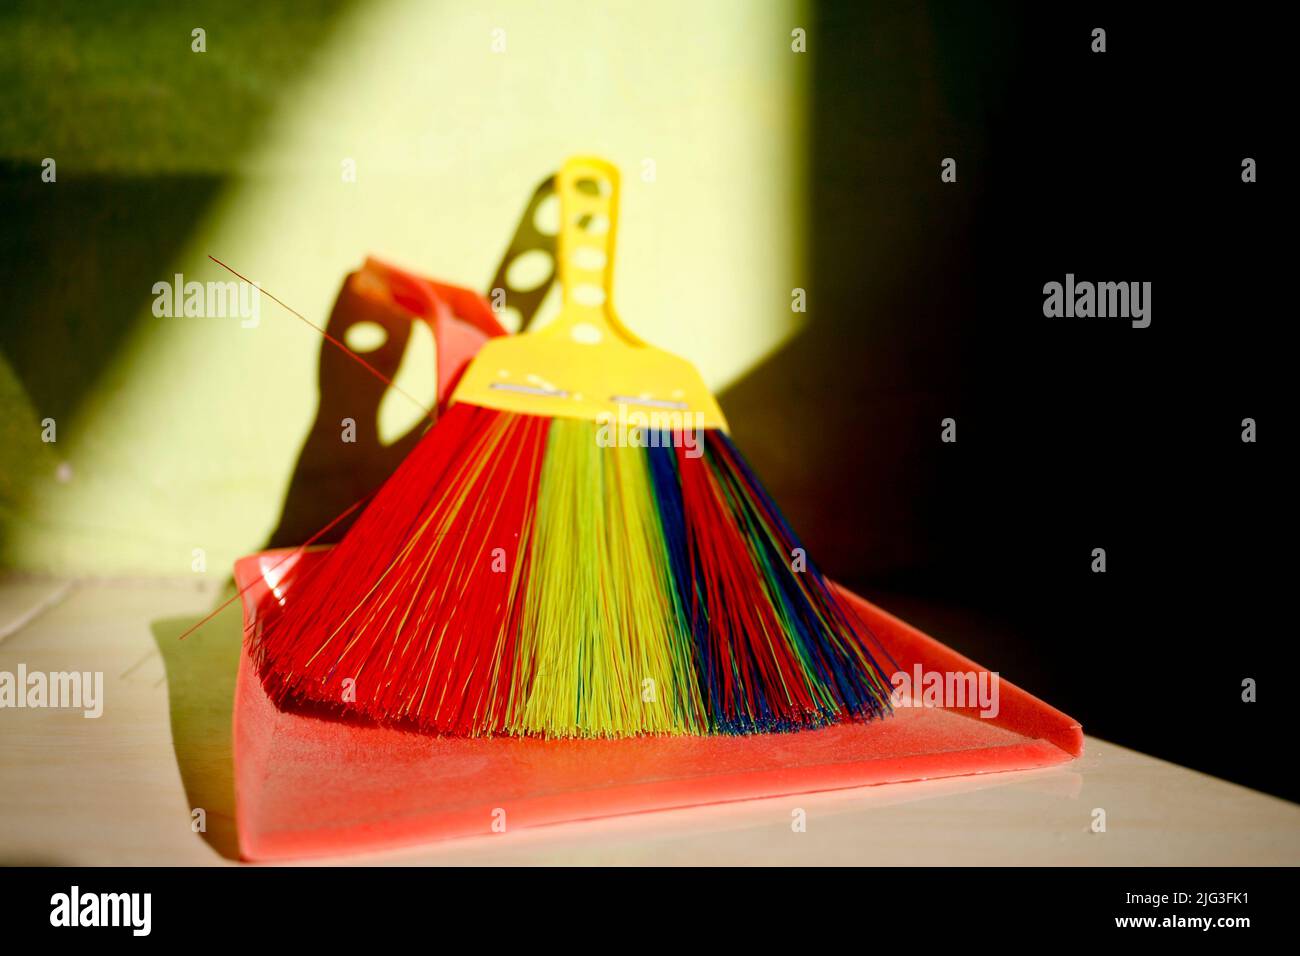 Red dustpan and colourful brush Stock Photo